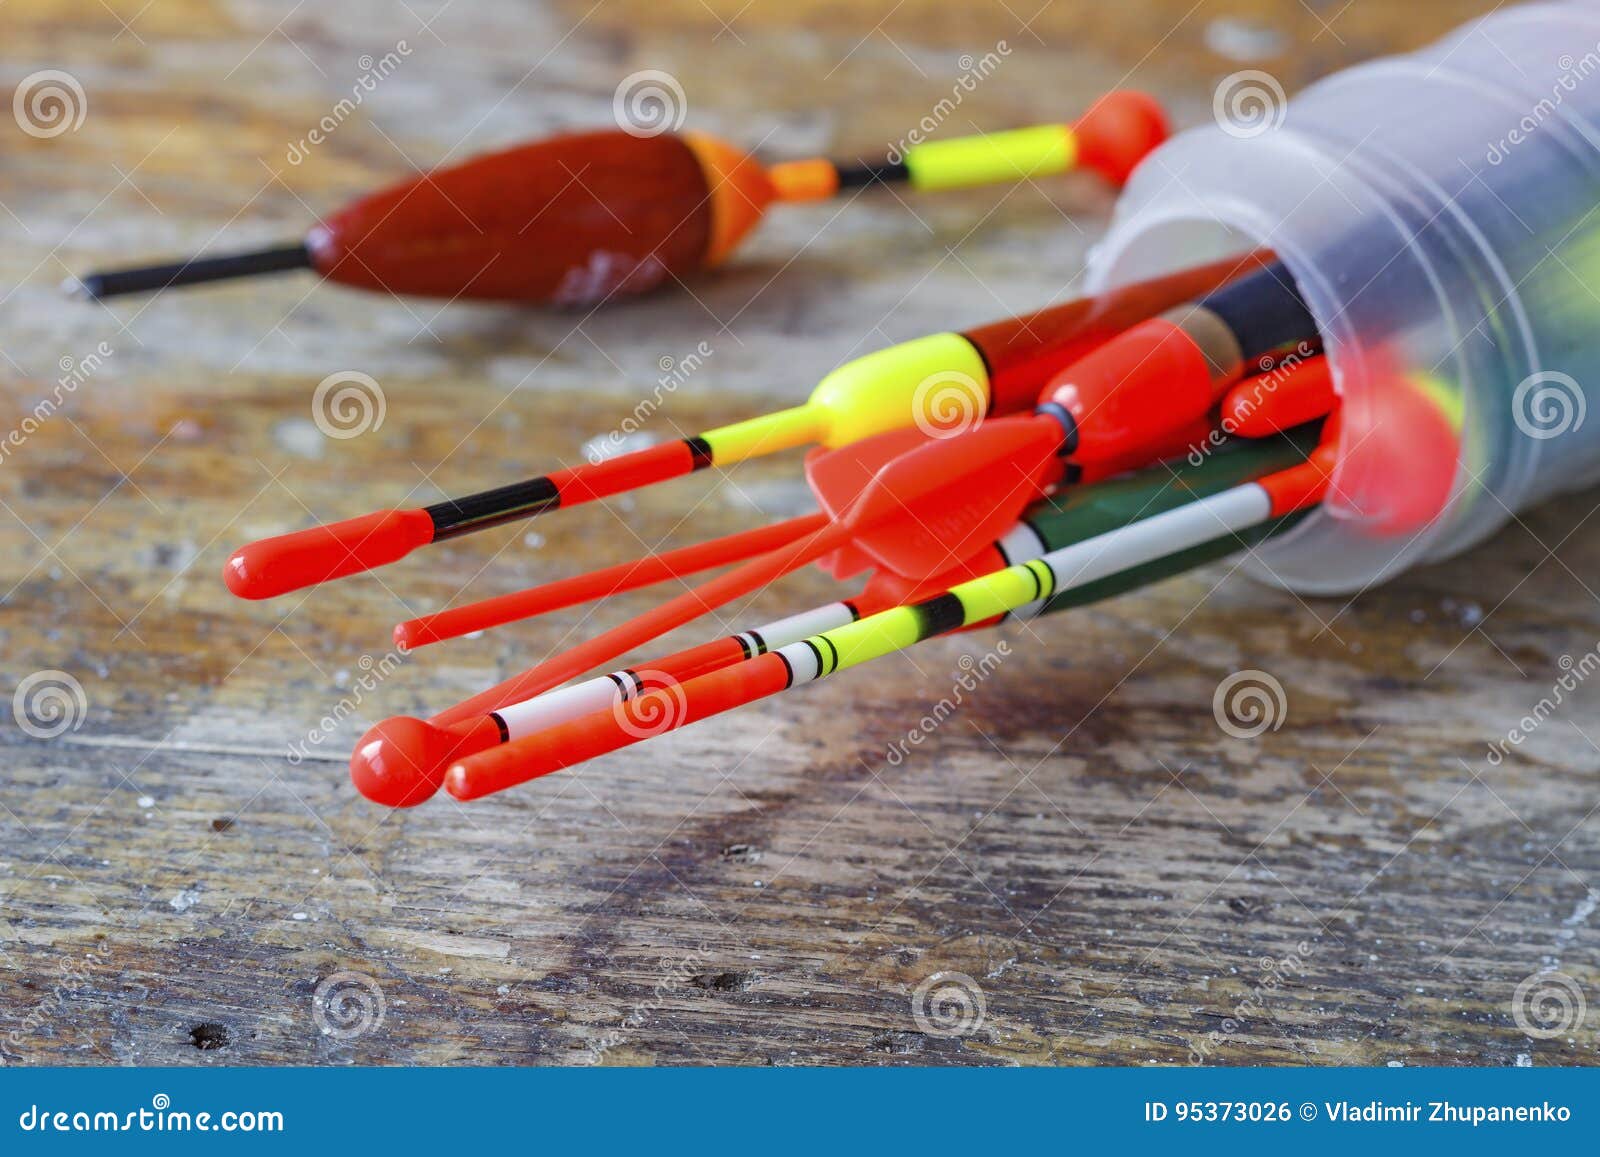 Set of Fishing Bobbers on a Wooden Table Stock Photo - Image of bobbers,  handmade: 95373026